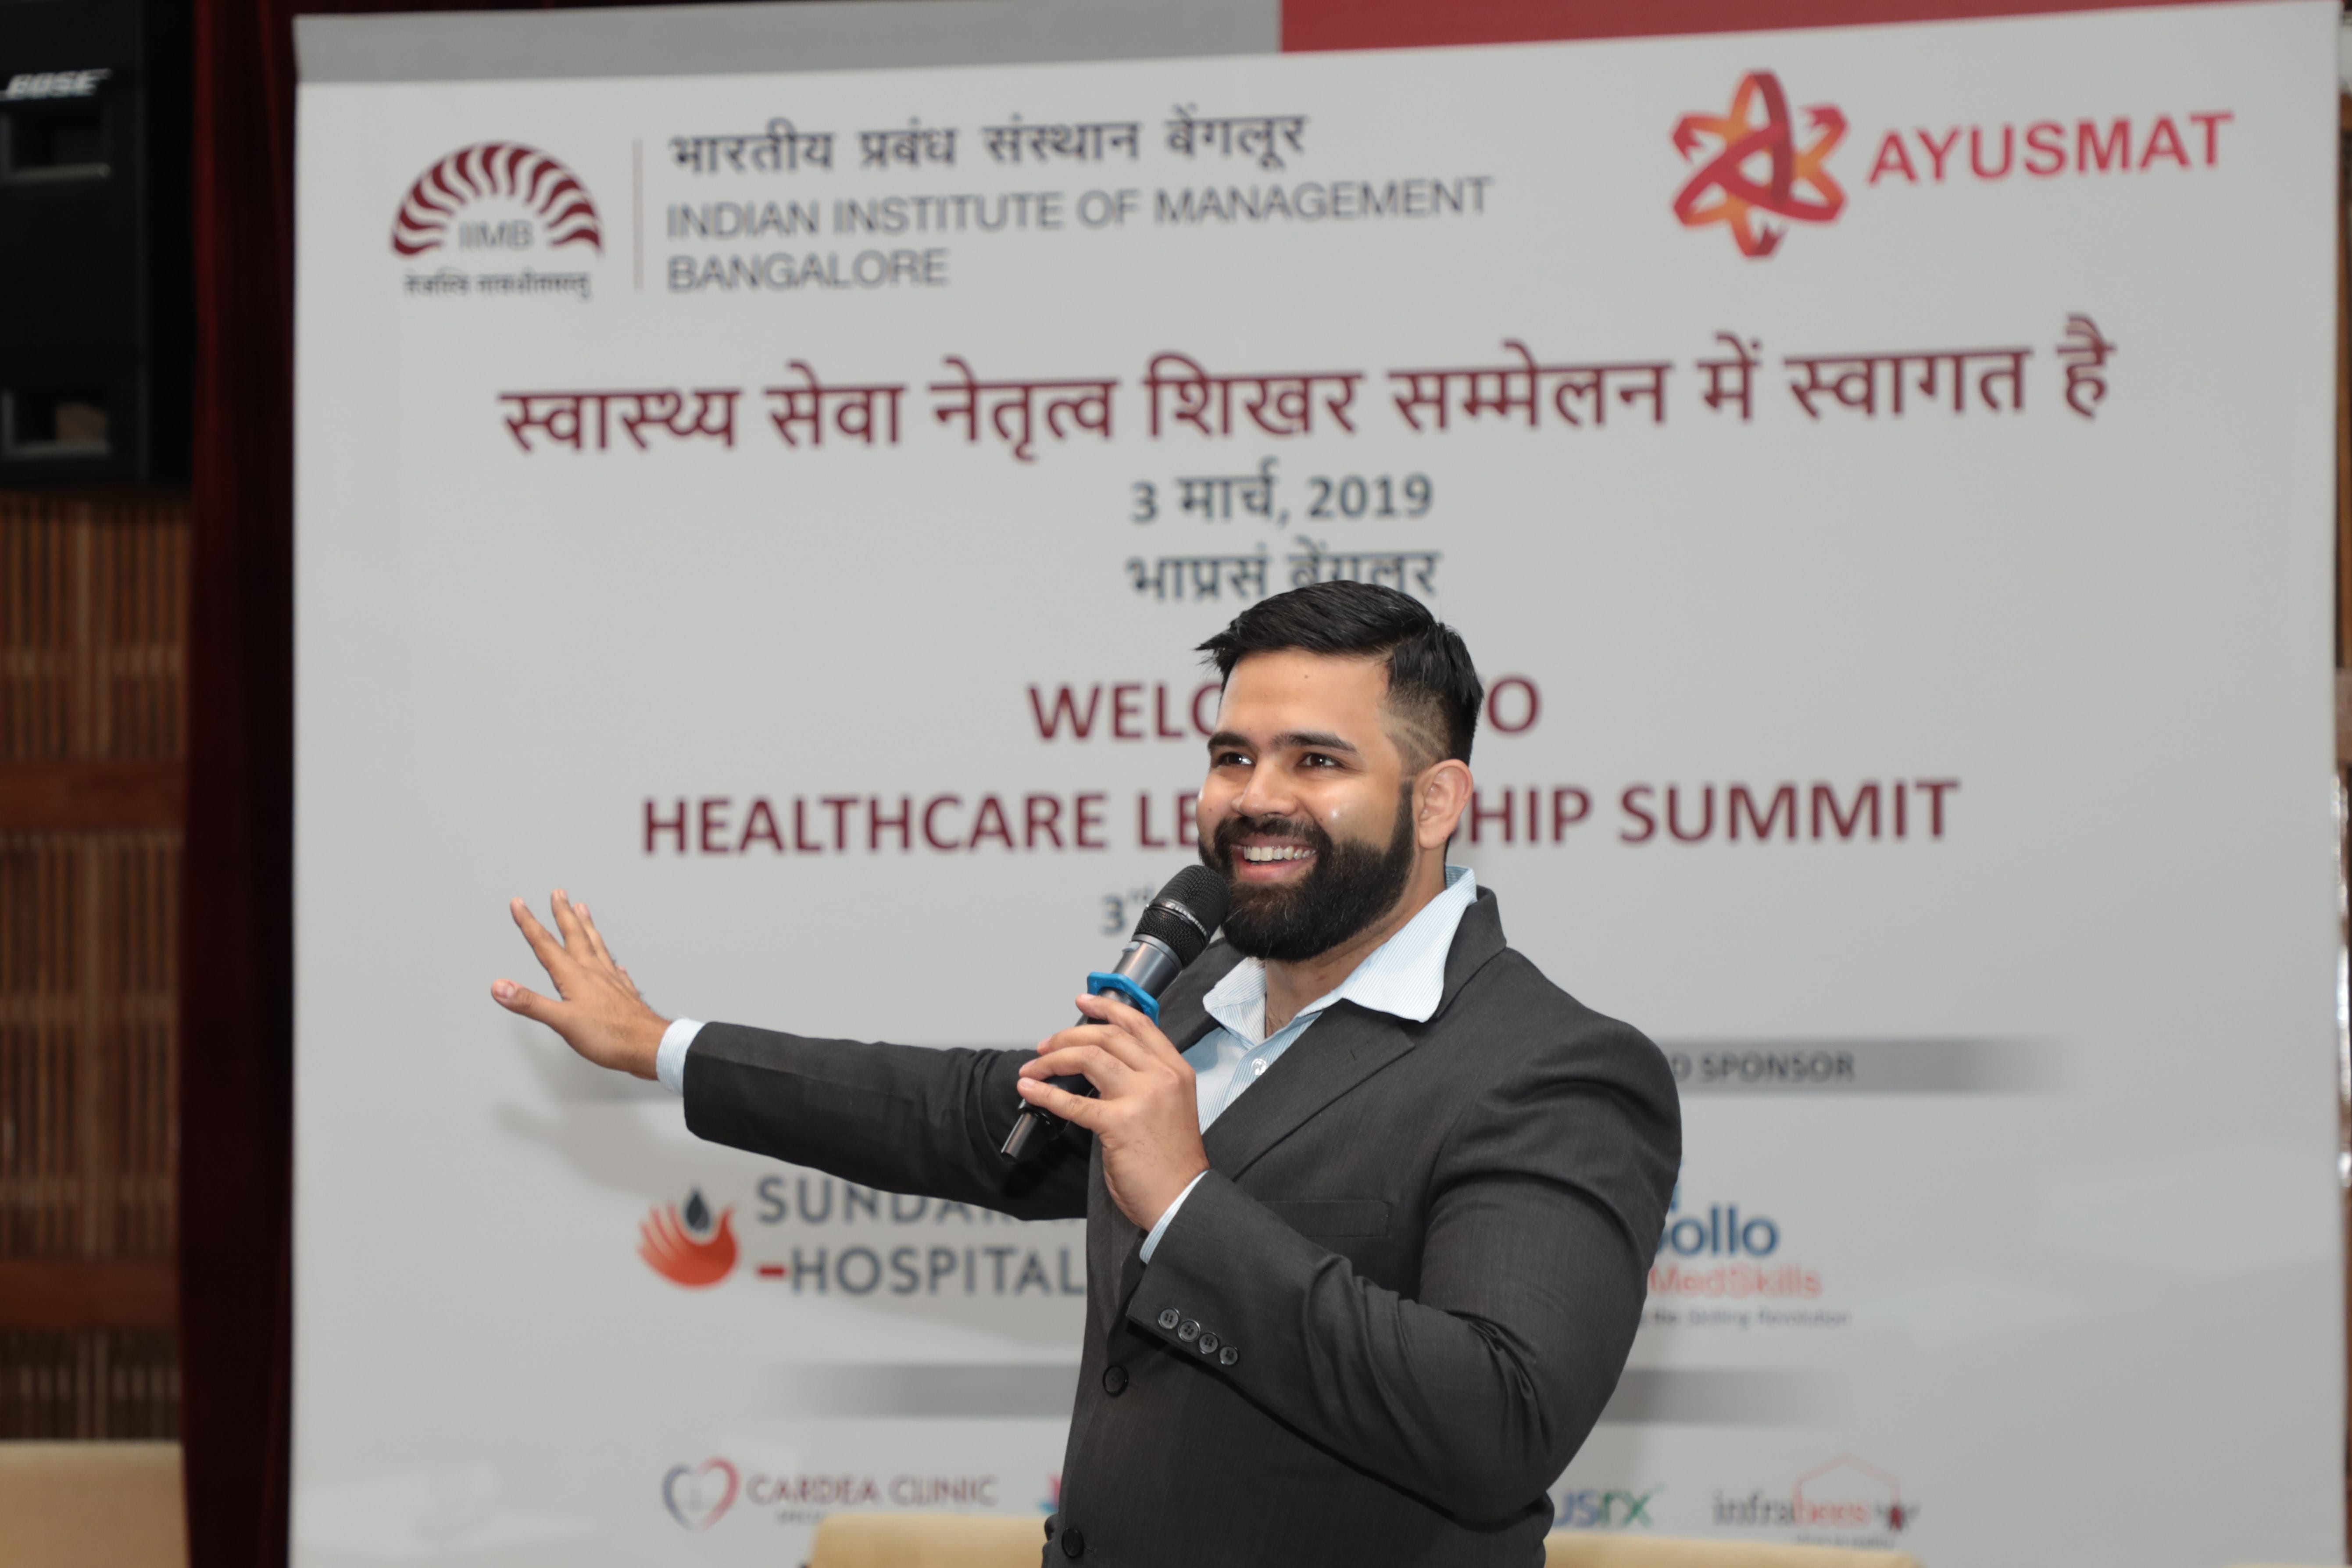 Stand-up comedy being performed by Dr. Jagdish Chaturvedi, Medical Device Innovator, and ENT Surgeon.